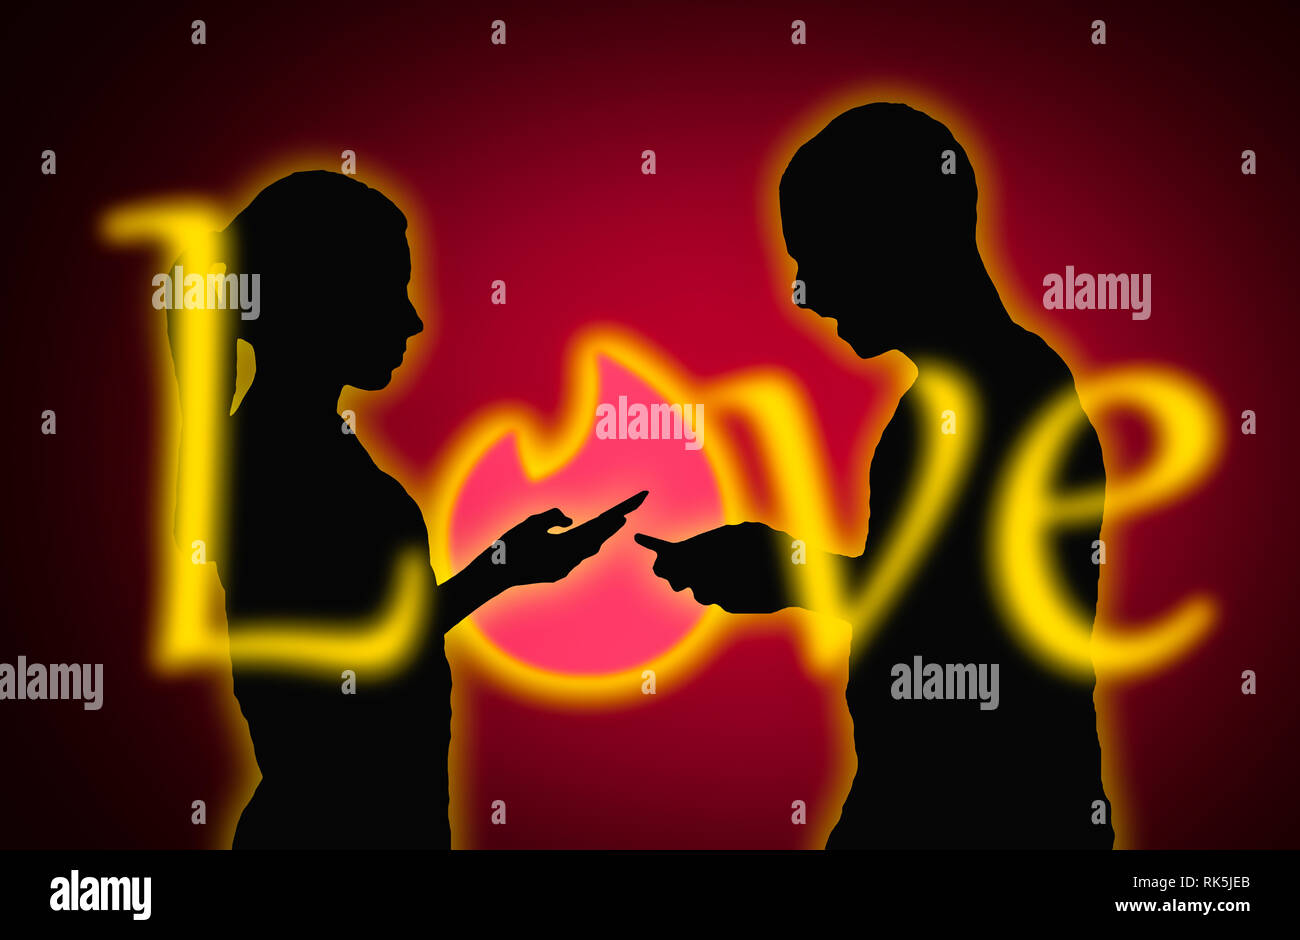 Silhouettes of a couple of people facing each other using the Tinder app on smartphones to find love online. Internet dating concept. Stock Photo